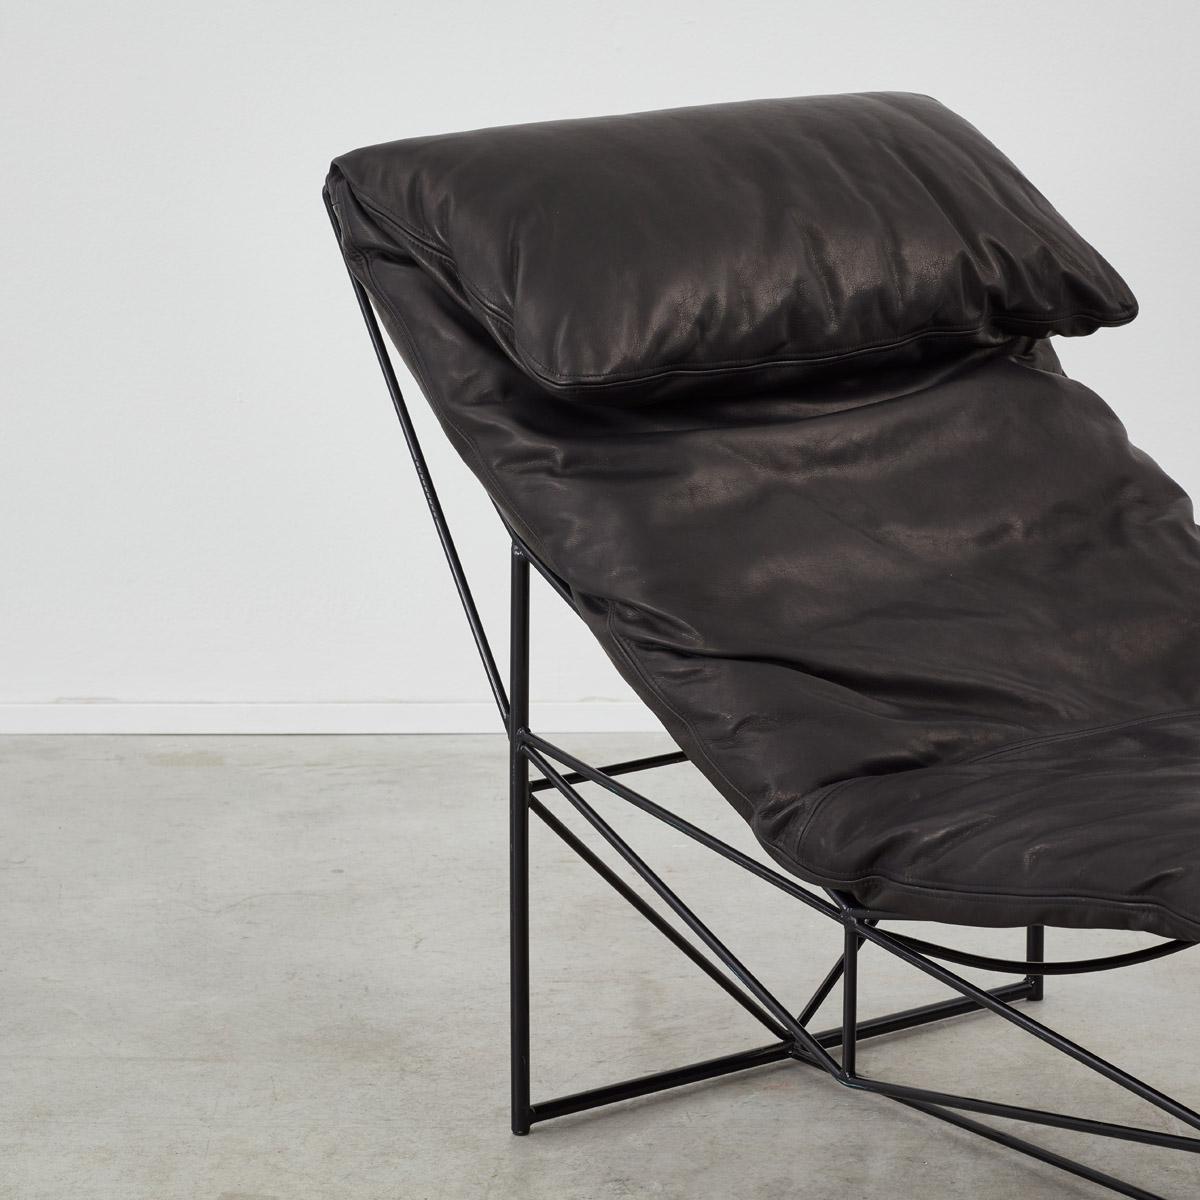 Sculptural chaise longue by Paolo Passerini. The frame is formed of black lacquered iron rods joining at angels, creating striking triangular shapes. A large white cushion lines the top of the chair.